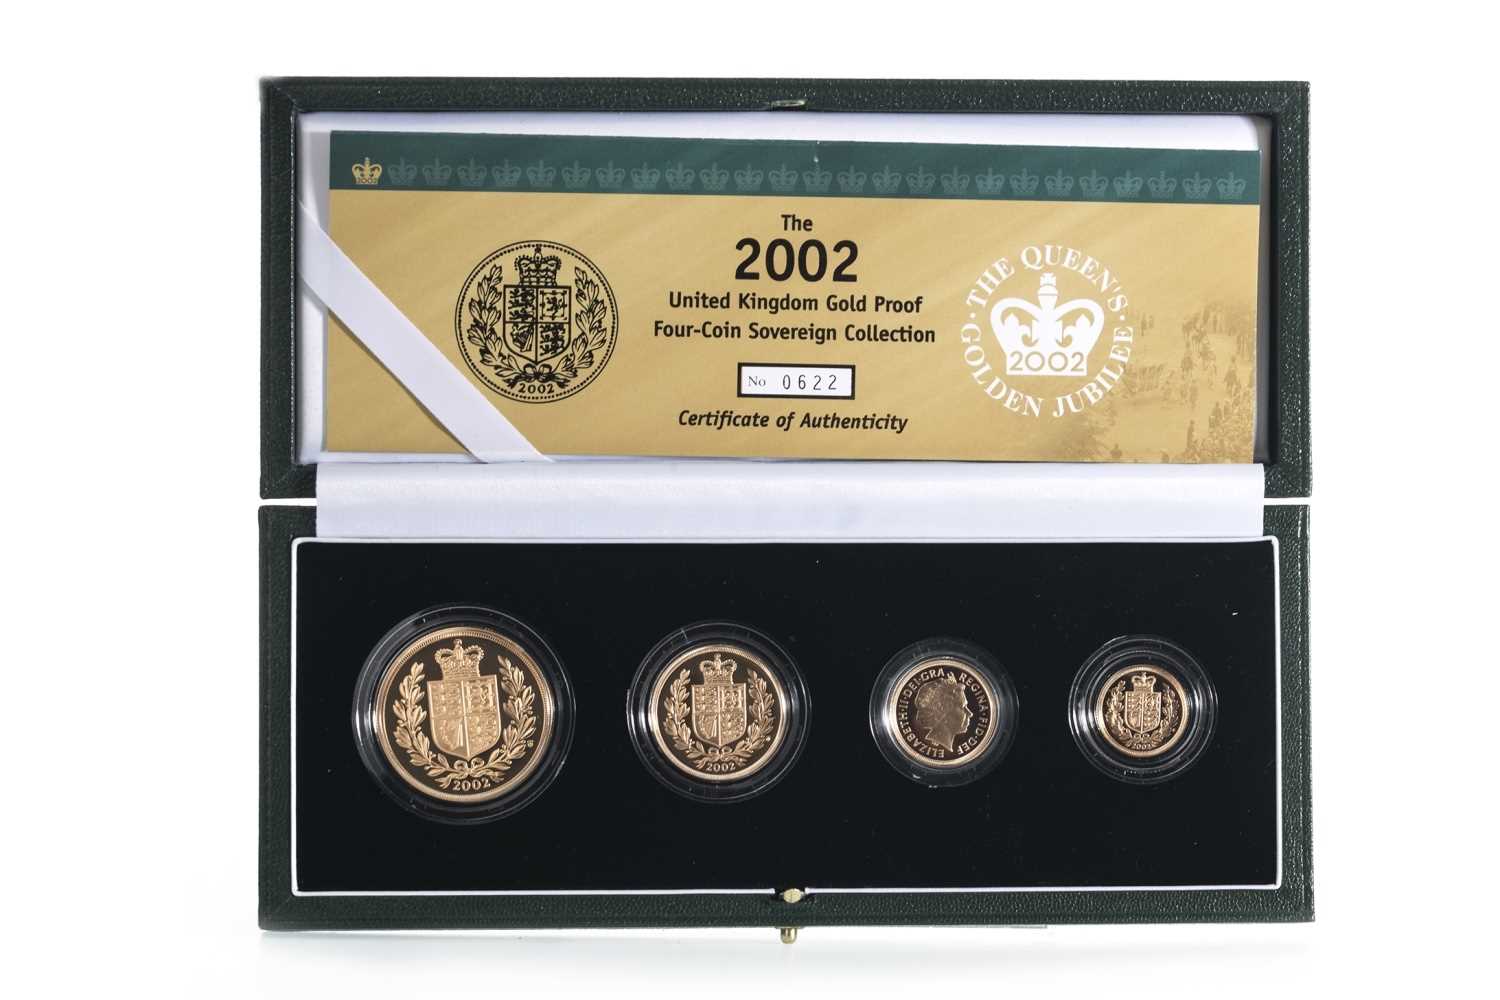 Lot 43 - 2002 GOLD PROOF UK SOVEREIGN COLLECTION FOUR COIN SET